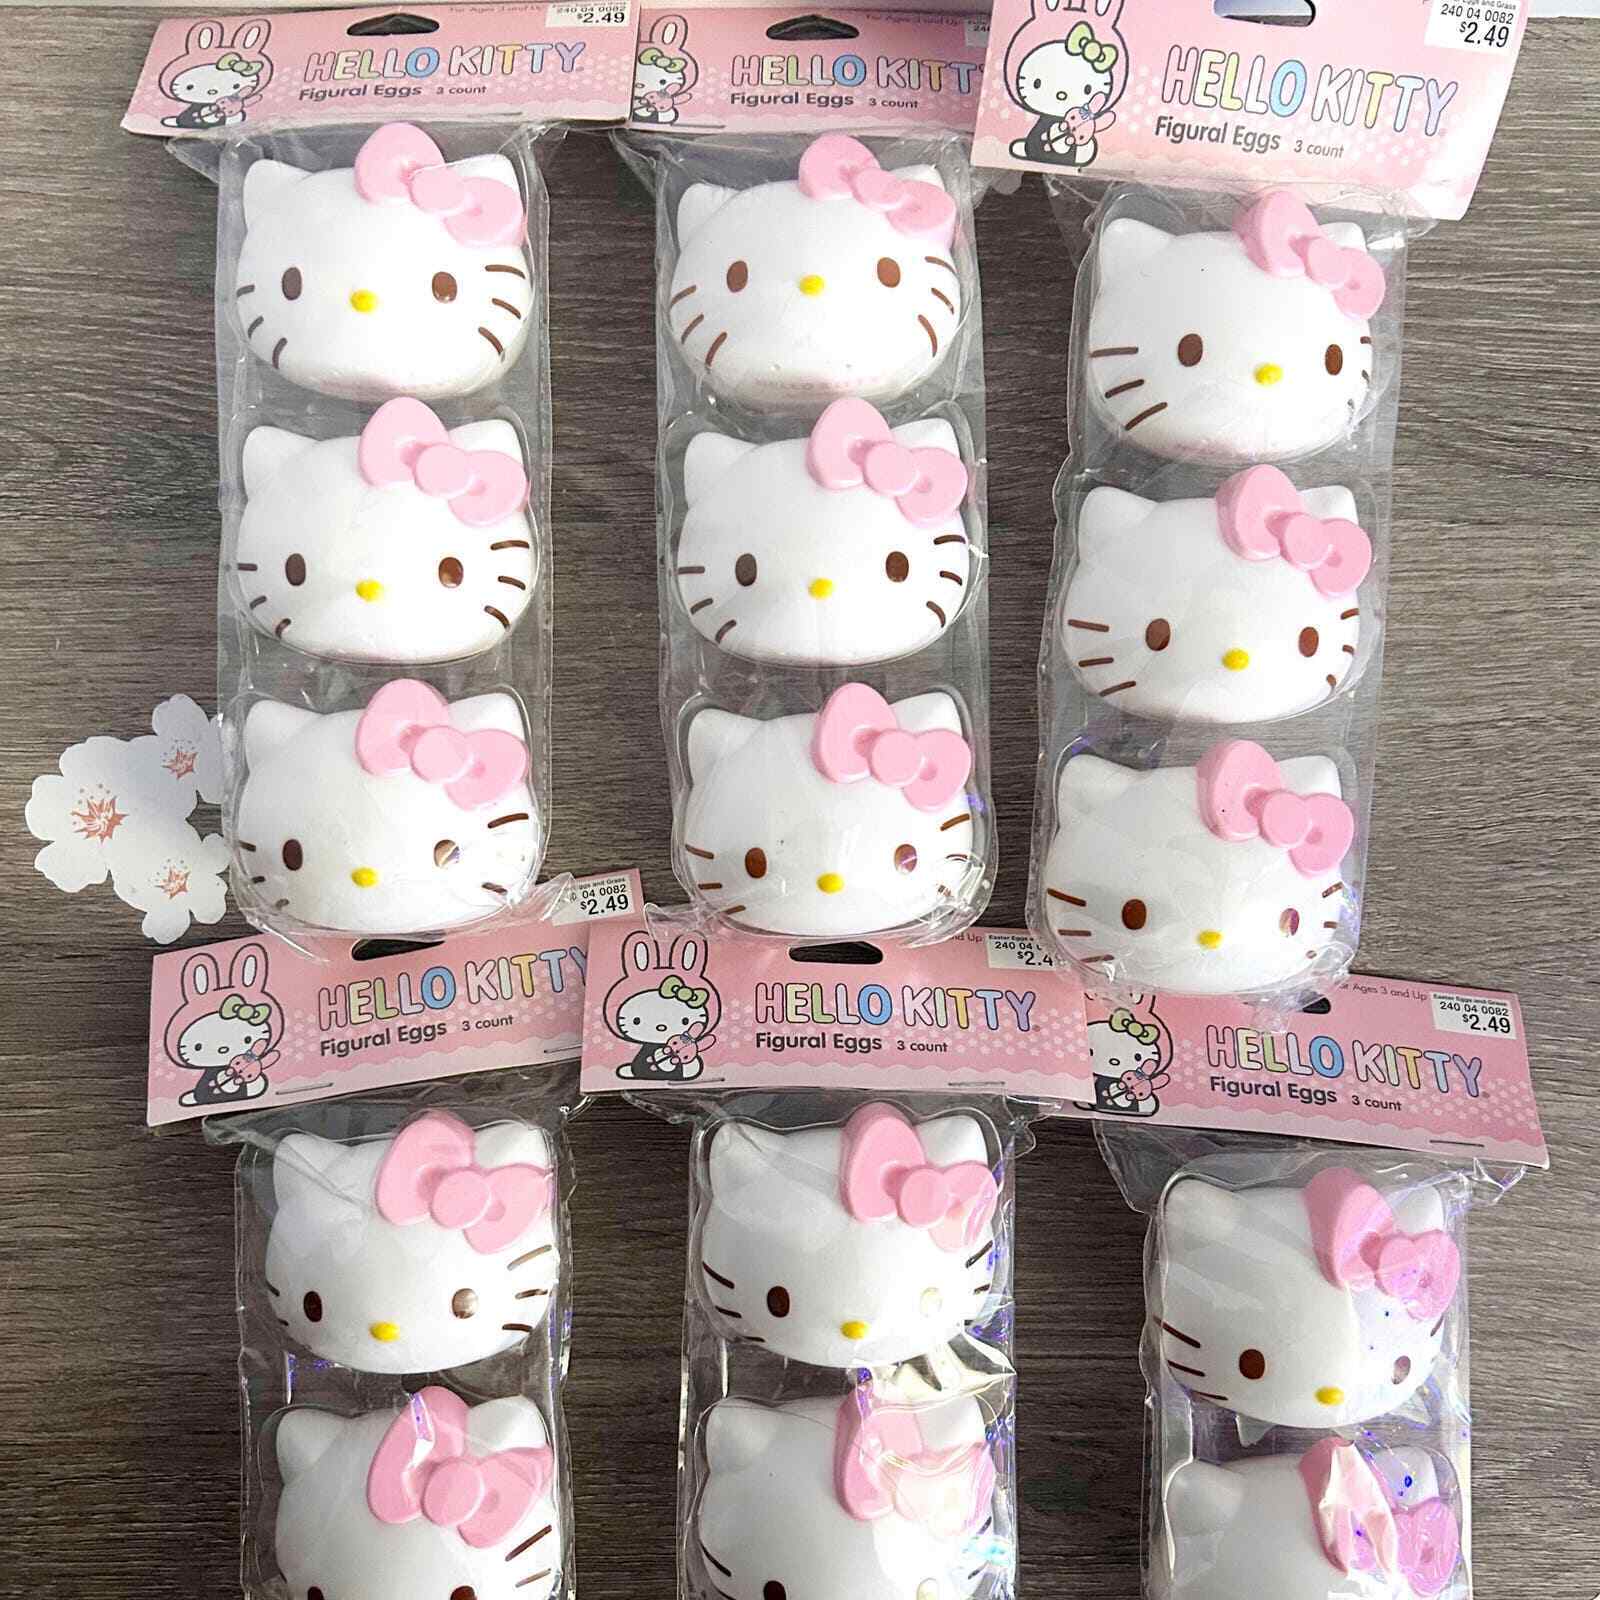 Hello Kitty Treat Containers 3 Count by Sanrio 2011 Easter Mini Seasonal New x6